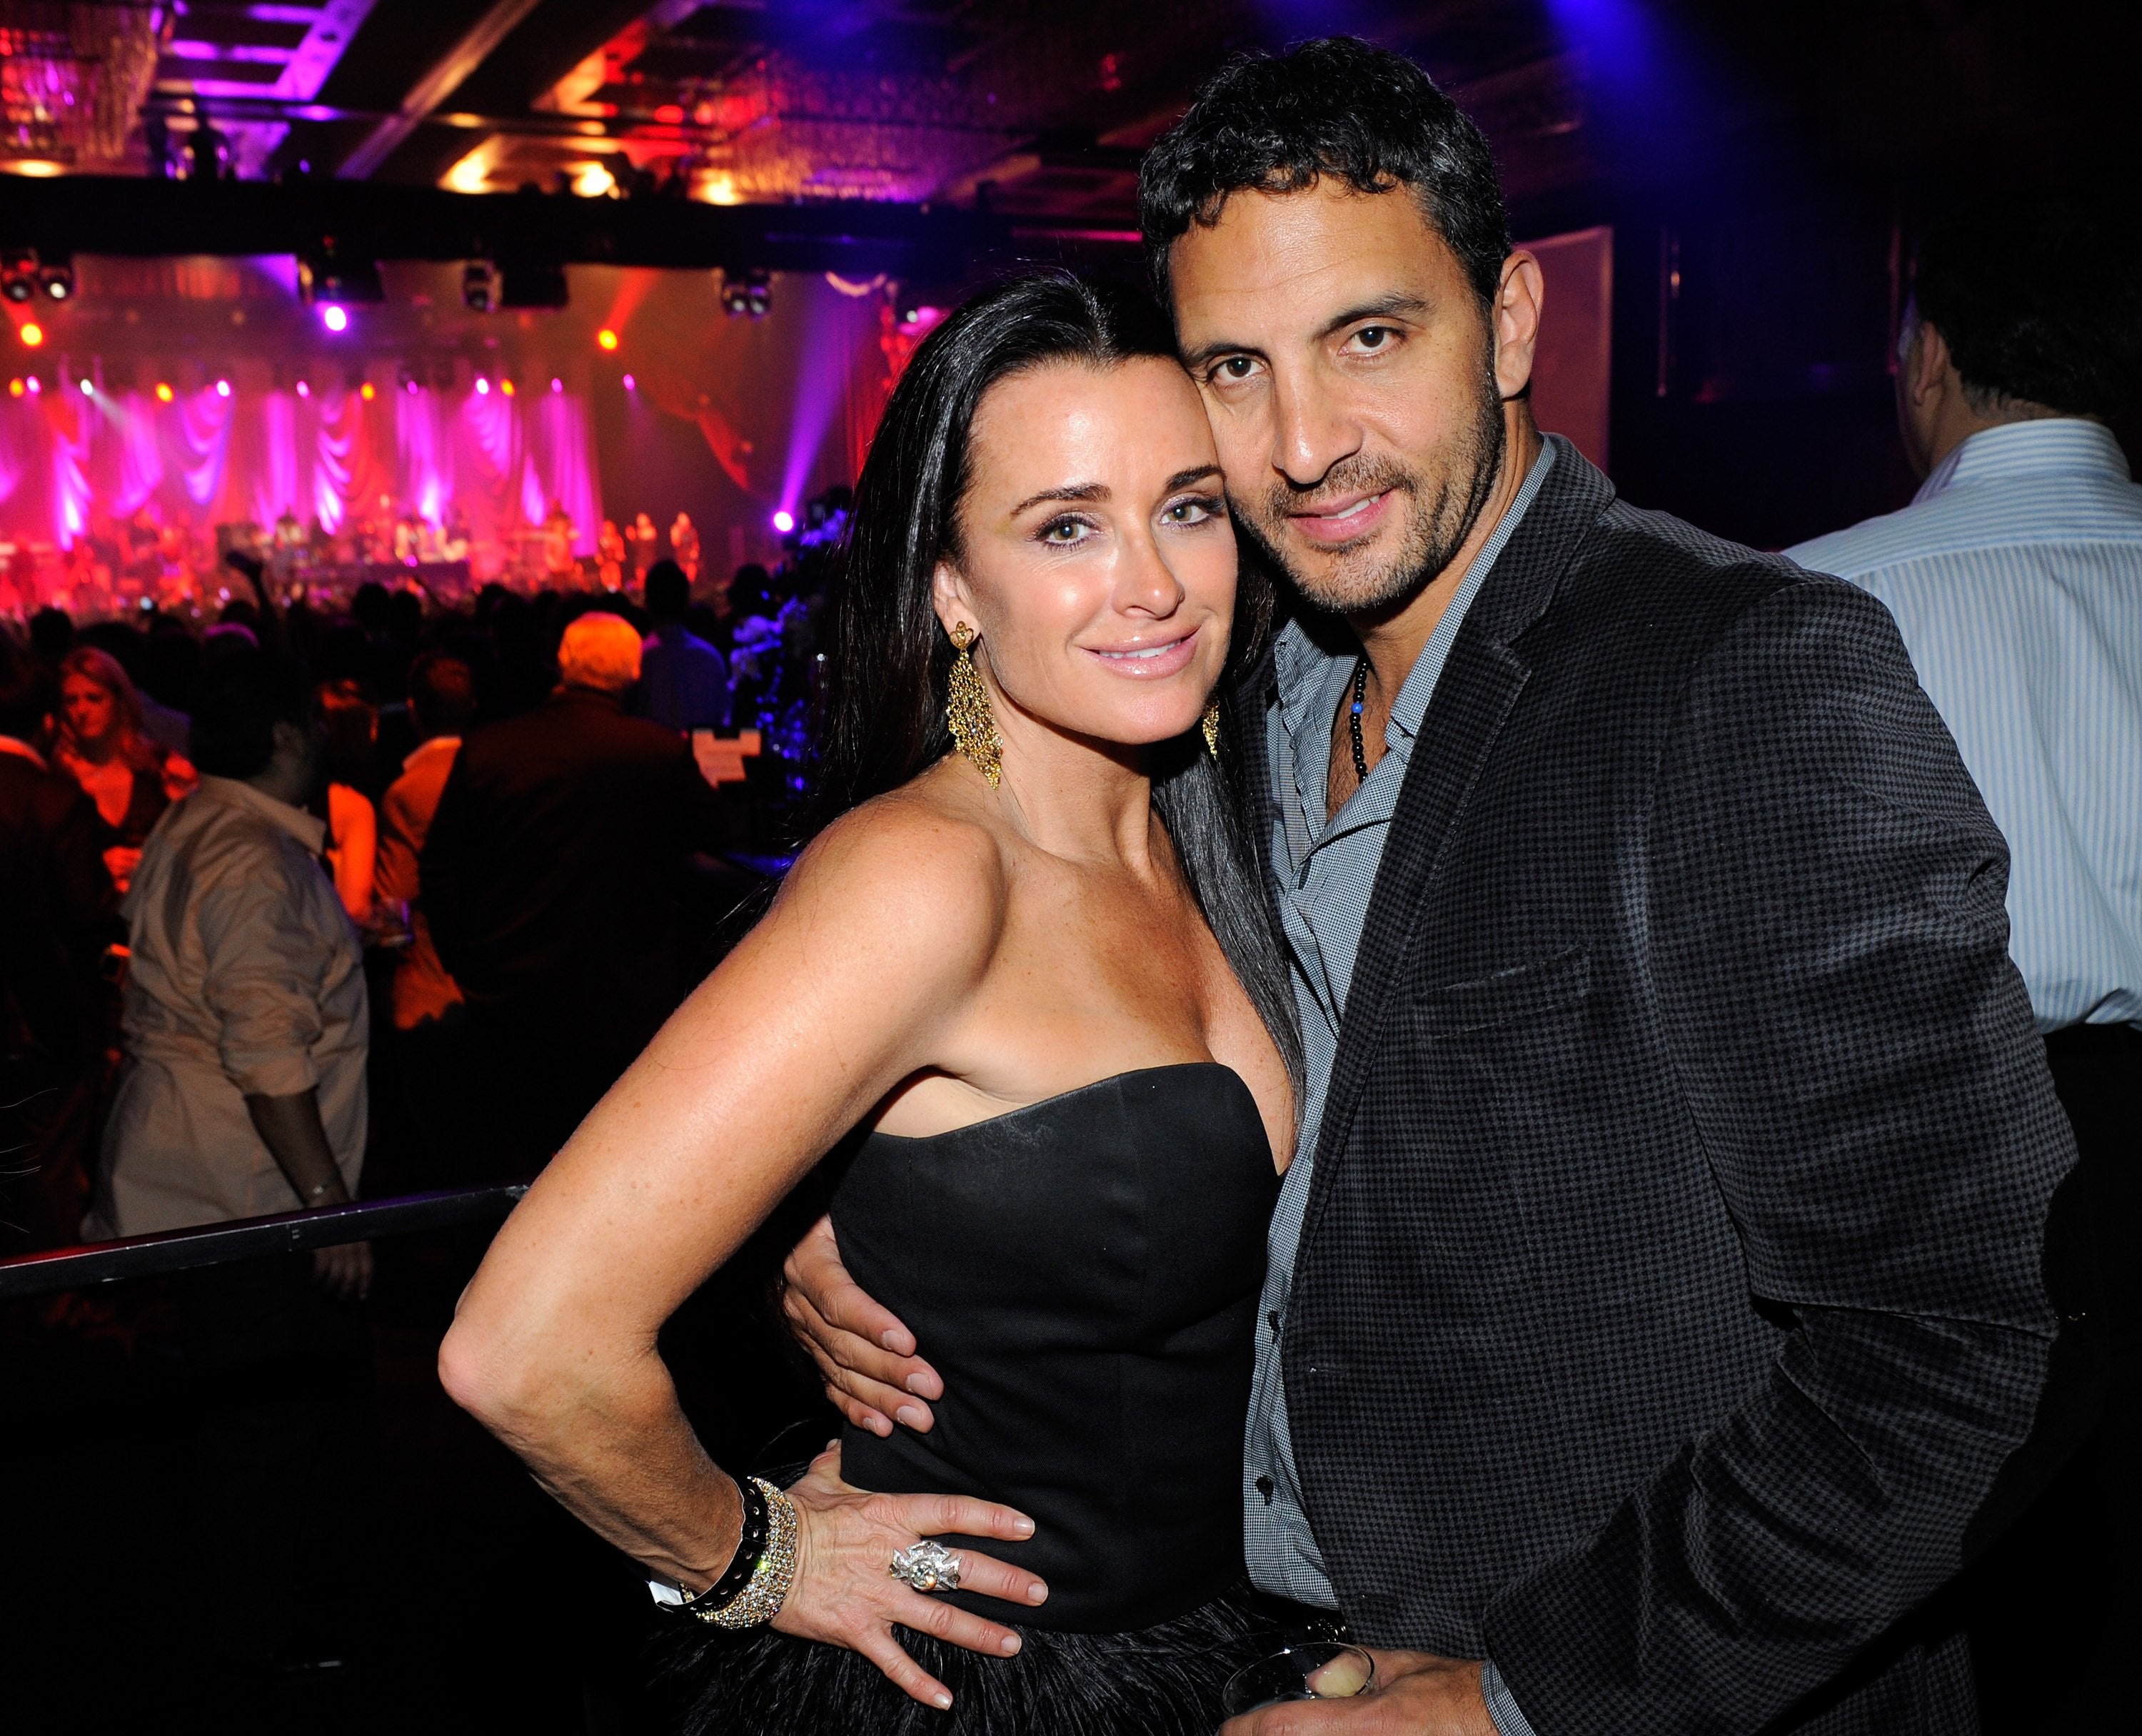 Kyle Richards and her husband Mauricio Umansky attend recording artist Stevie Wonder’s concert at The Chelsea at The Cosmopolitan of Las Vegas on New Year’s Eve December 31, 2011